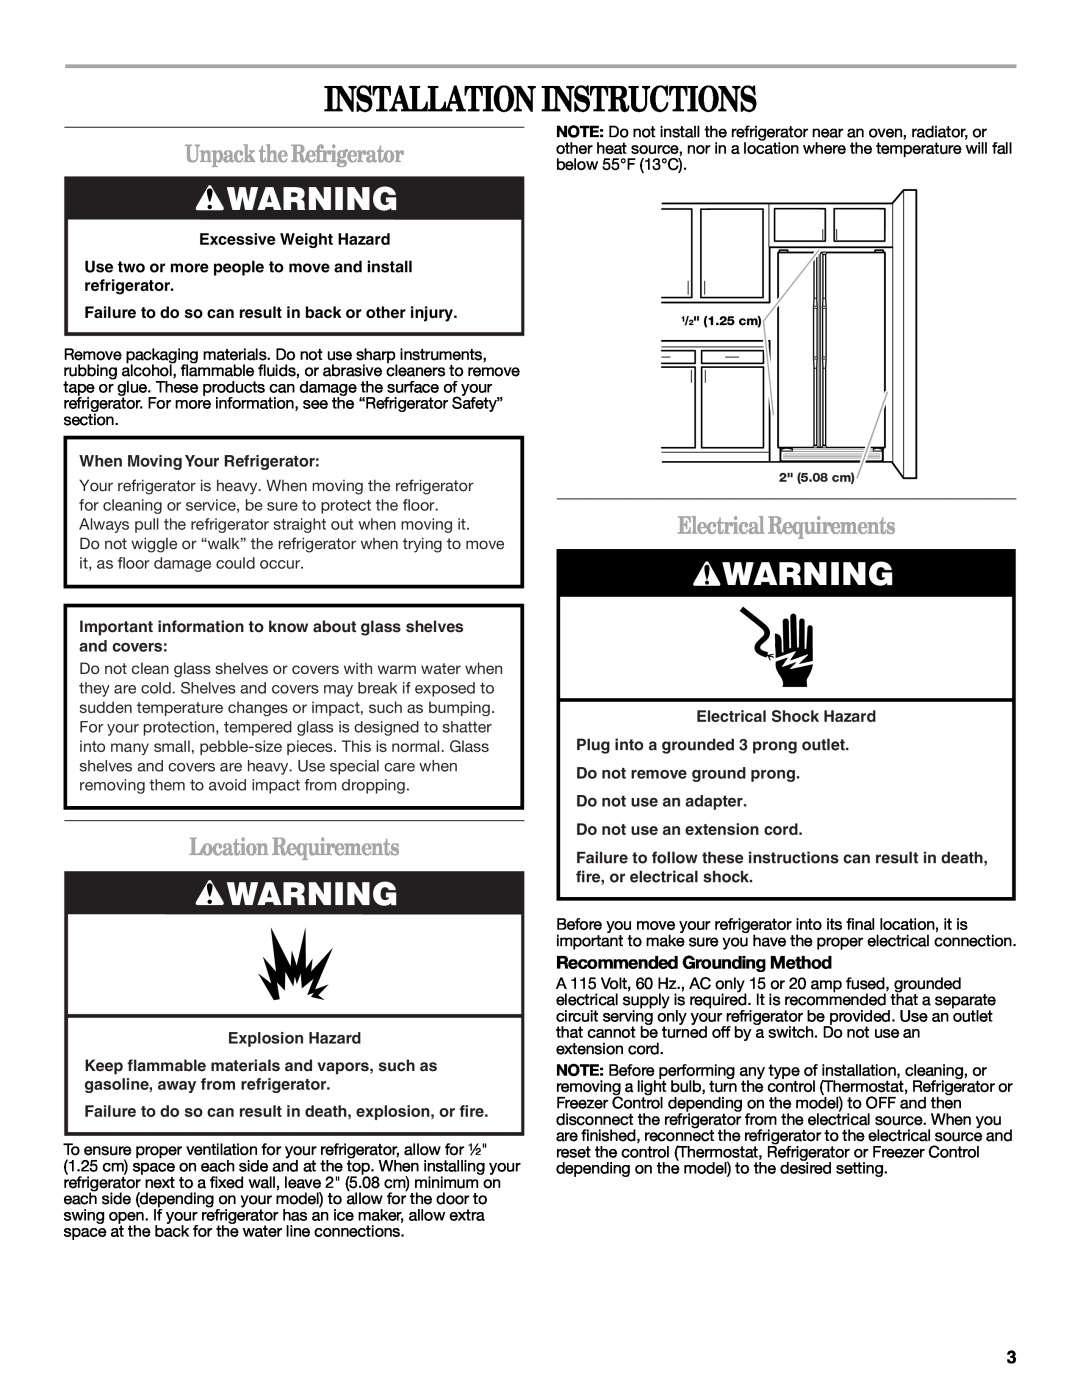 Whirlpool ED2GTKXNQ00 Installation Instructions, UnpacktheRefrigerator, LocationRequirements, Electrical Requirements 